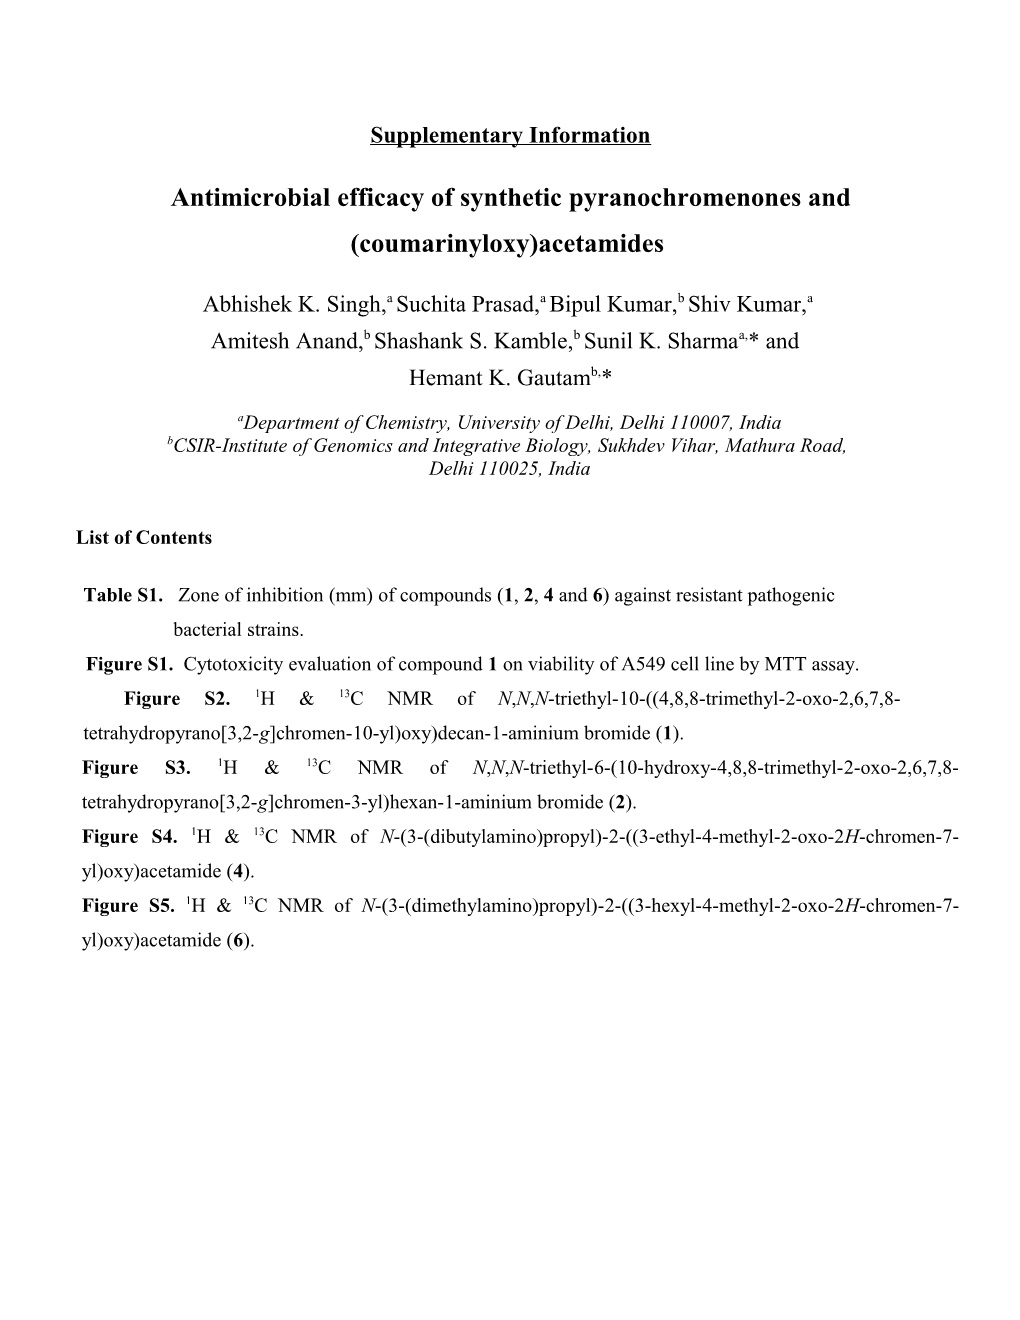 Antimicrobial Efficacy of Synthetic Pyranochromenones and (Coumarinyloxy)Acetamides